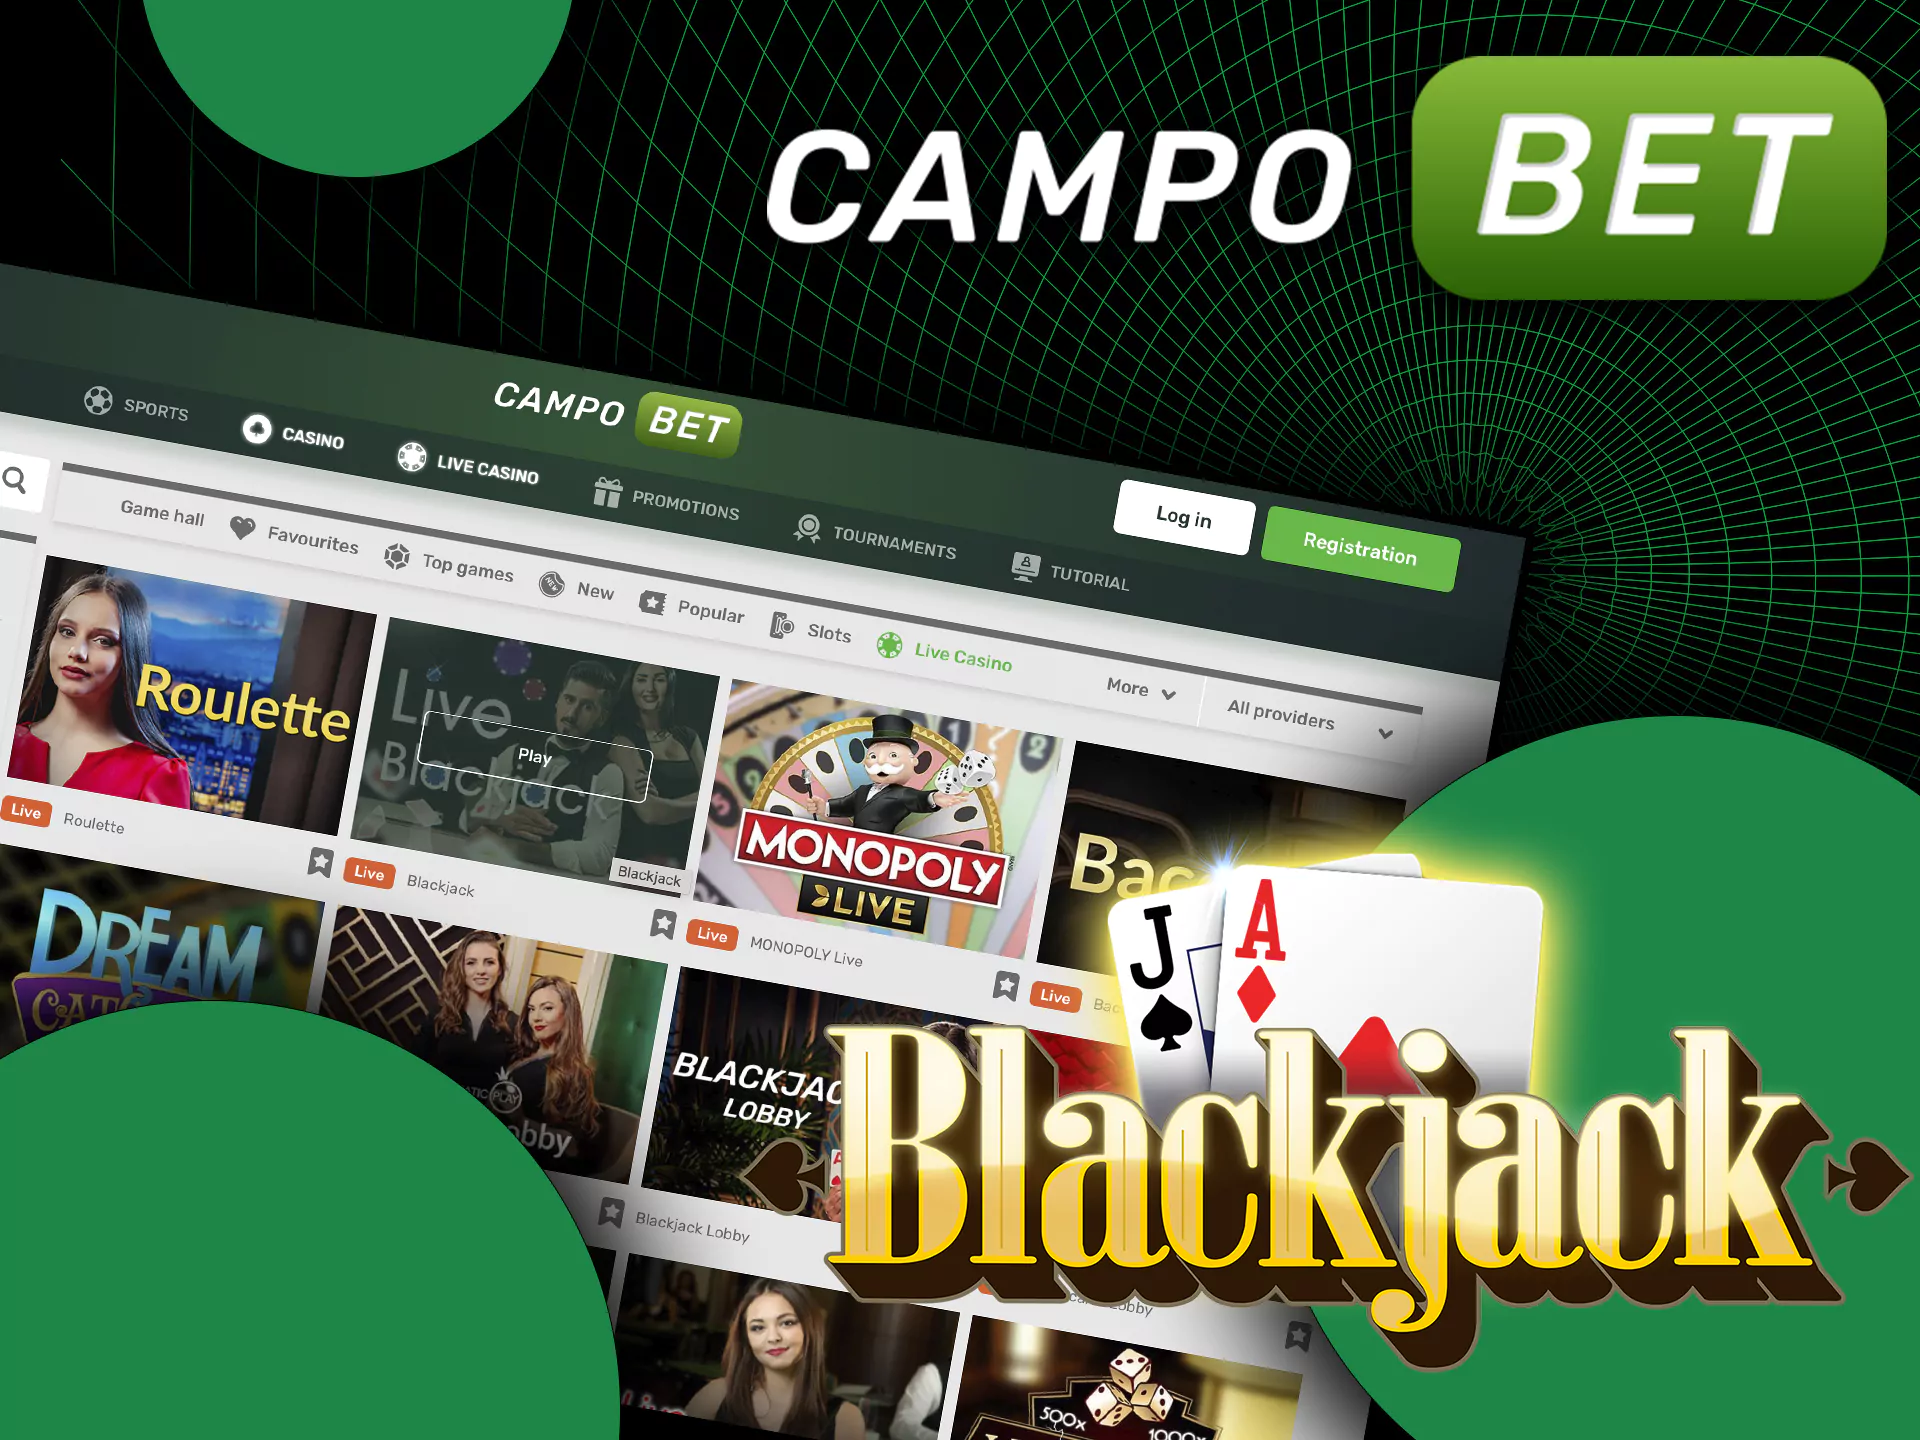 Blackjack rooms are also popular in the casino section of Campobet.